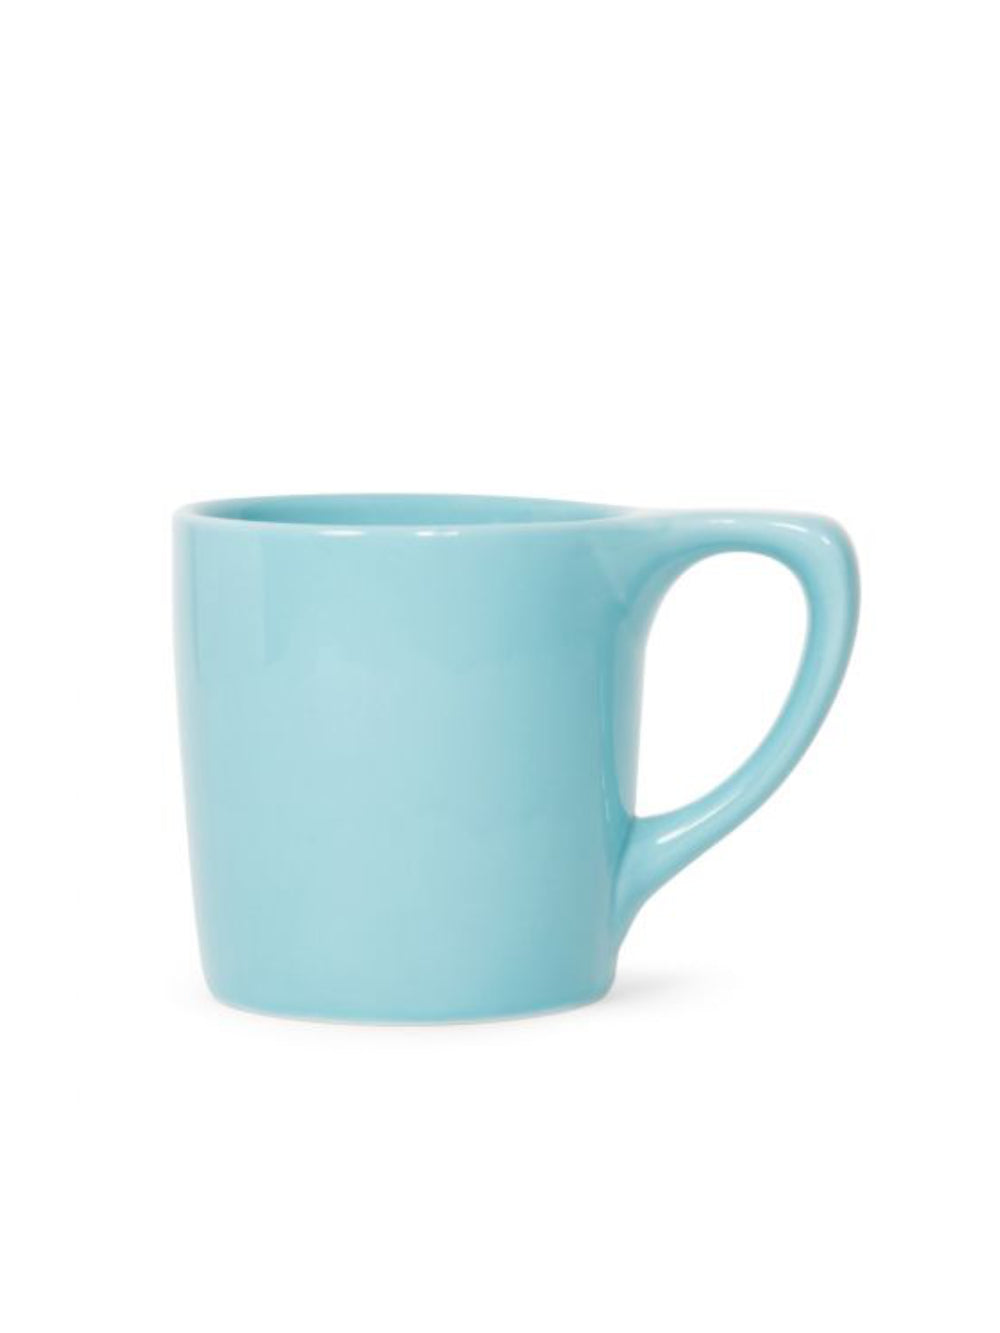 https://cdn.shopify.com/s/files/1/2404/0687/products/notneutral_lino-mug-10_ozone-blue_85cd5ba1-889c-4560-b7df-c16f21895ebf.jpg?v=1654097241&width=1000